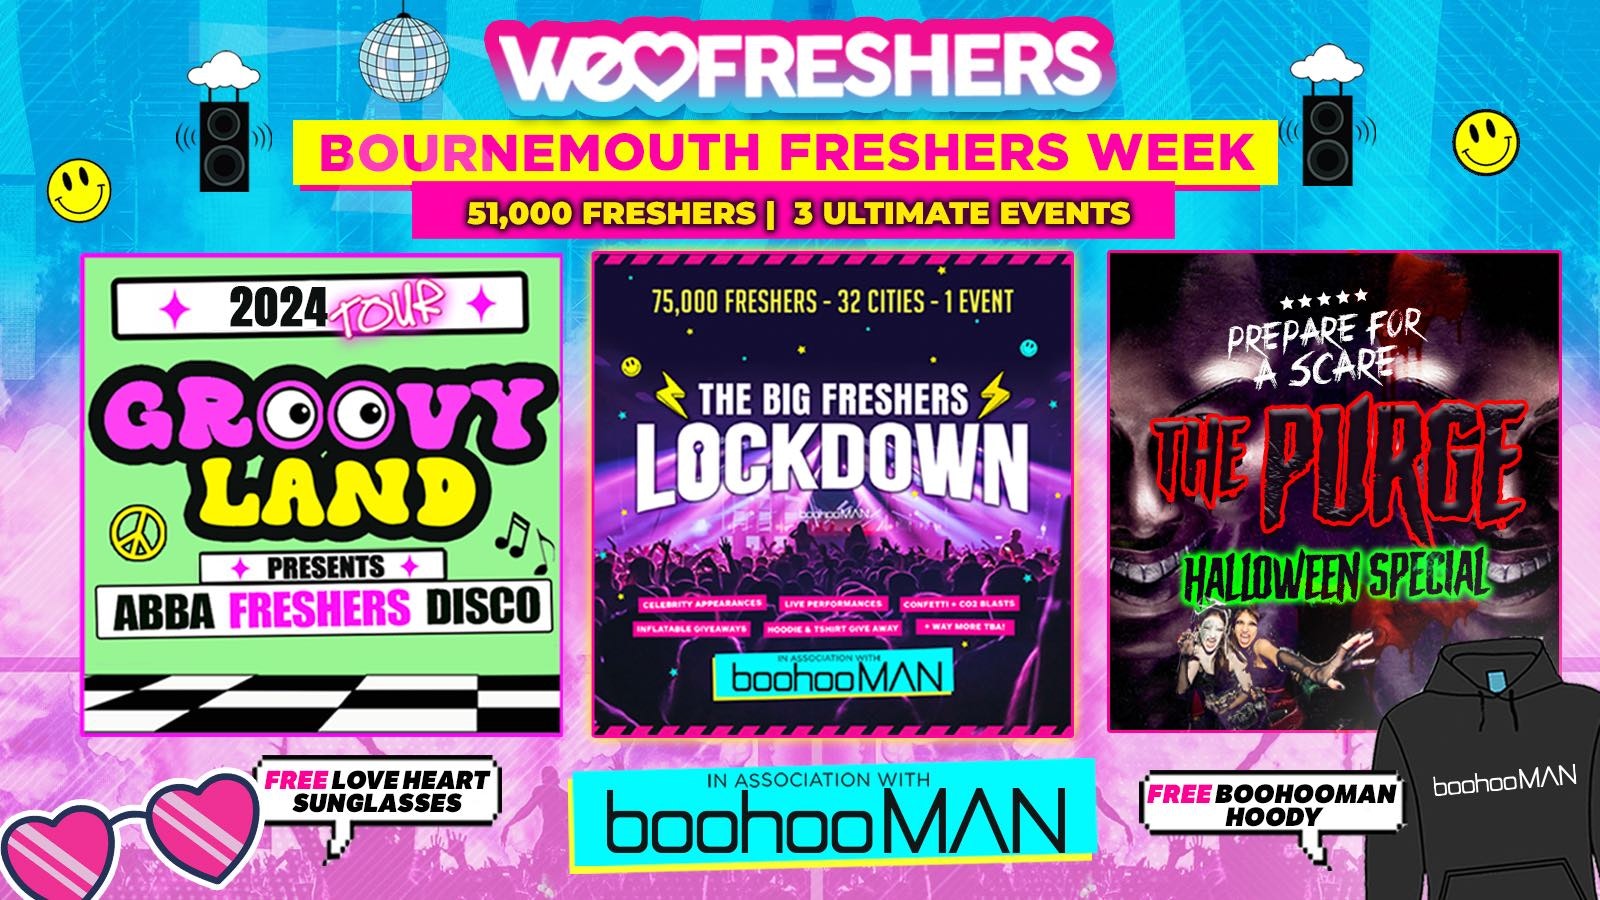 WE LOVE BOURNEMOUTH FRESHERS 2024 in association with boohooMAN – ❗FREE BOOHOOMAN HOODIE TODAY ONLY ❗